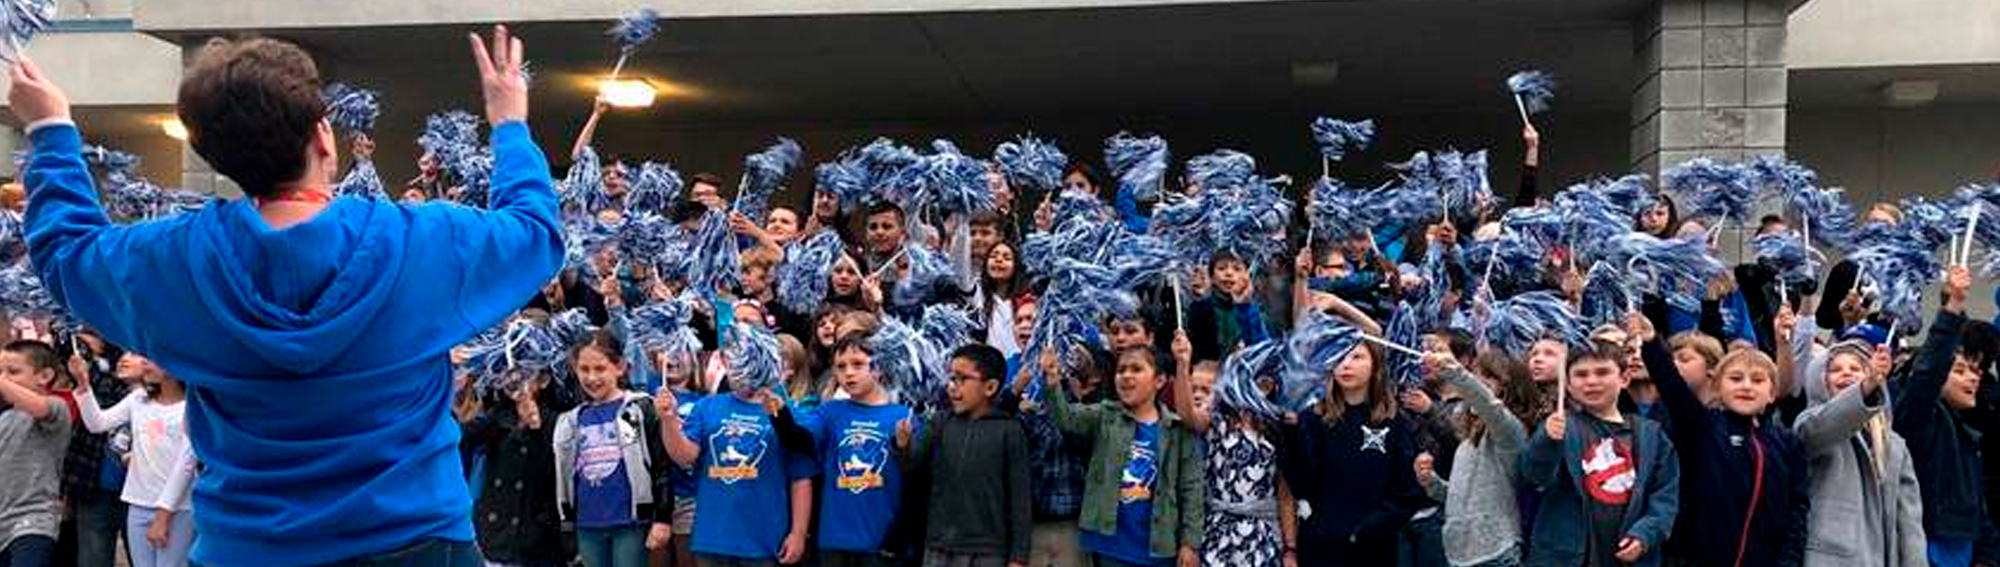 students and staff cheering and waving pom poms